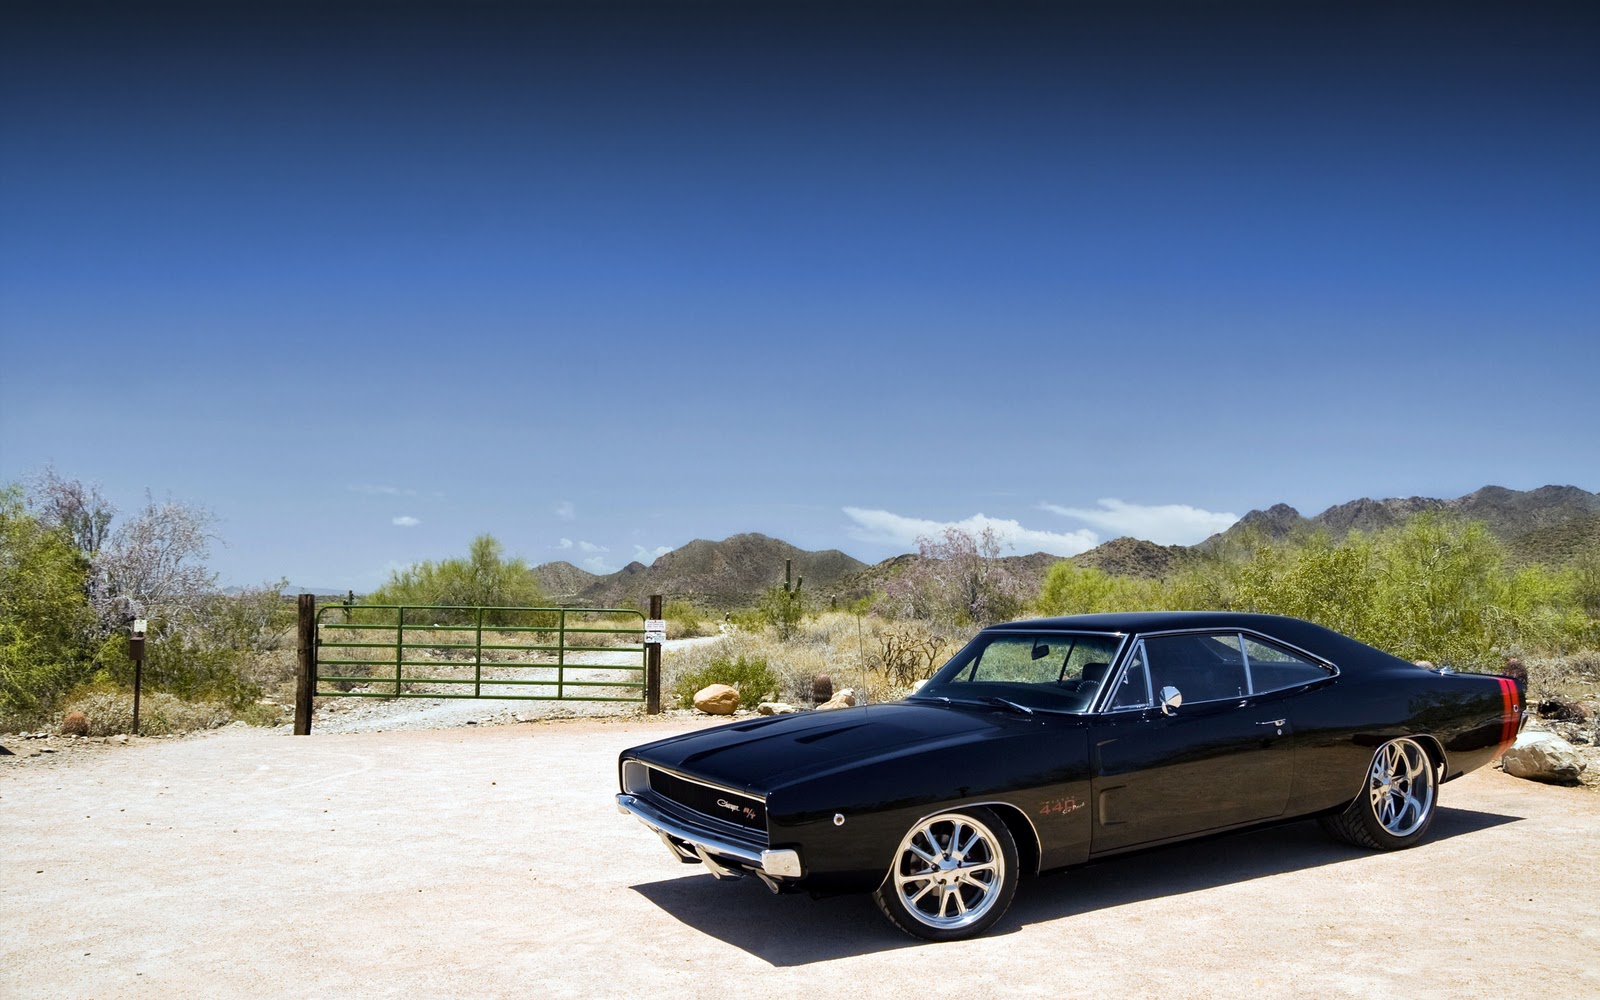  super muscle car Camaro SS Chevy legend 2012 download wallpapers 1600x1000